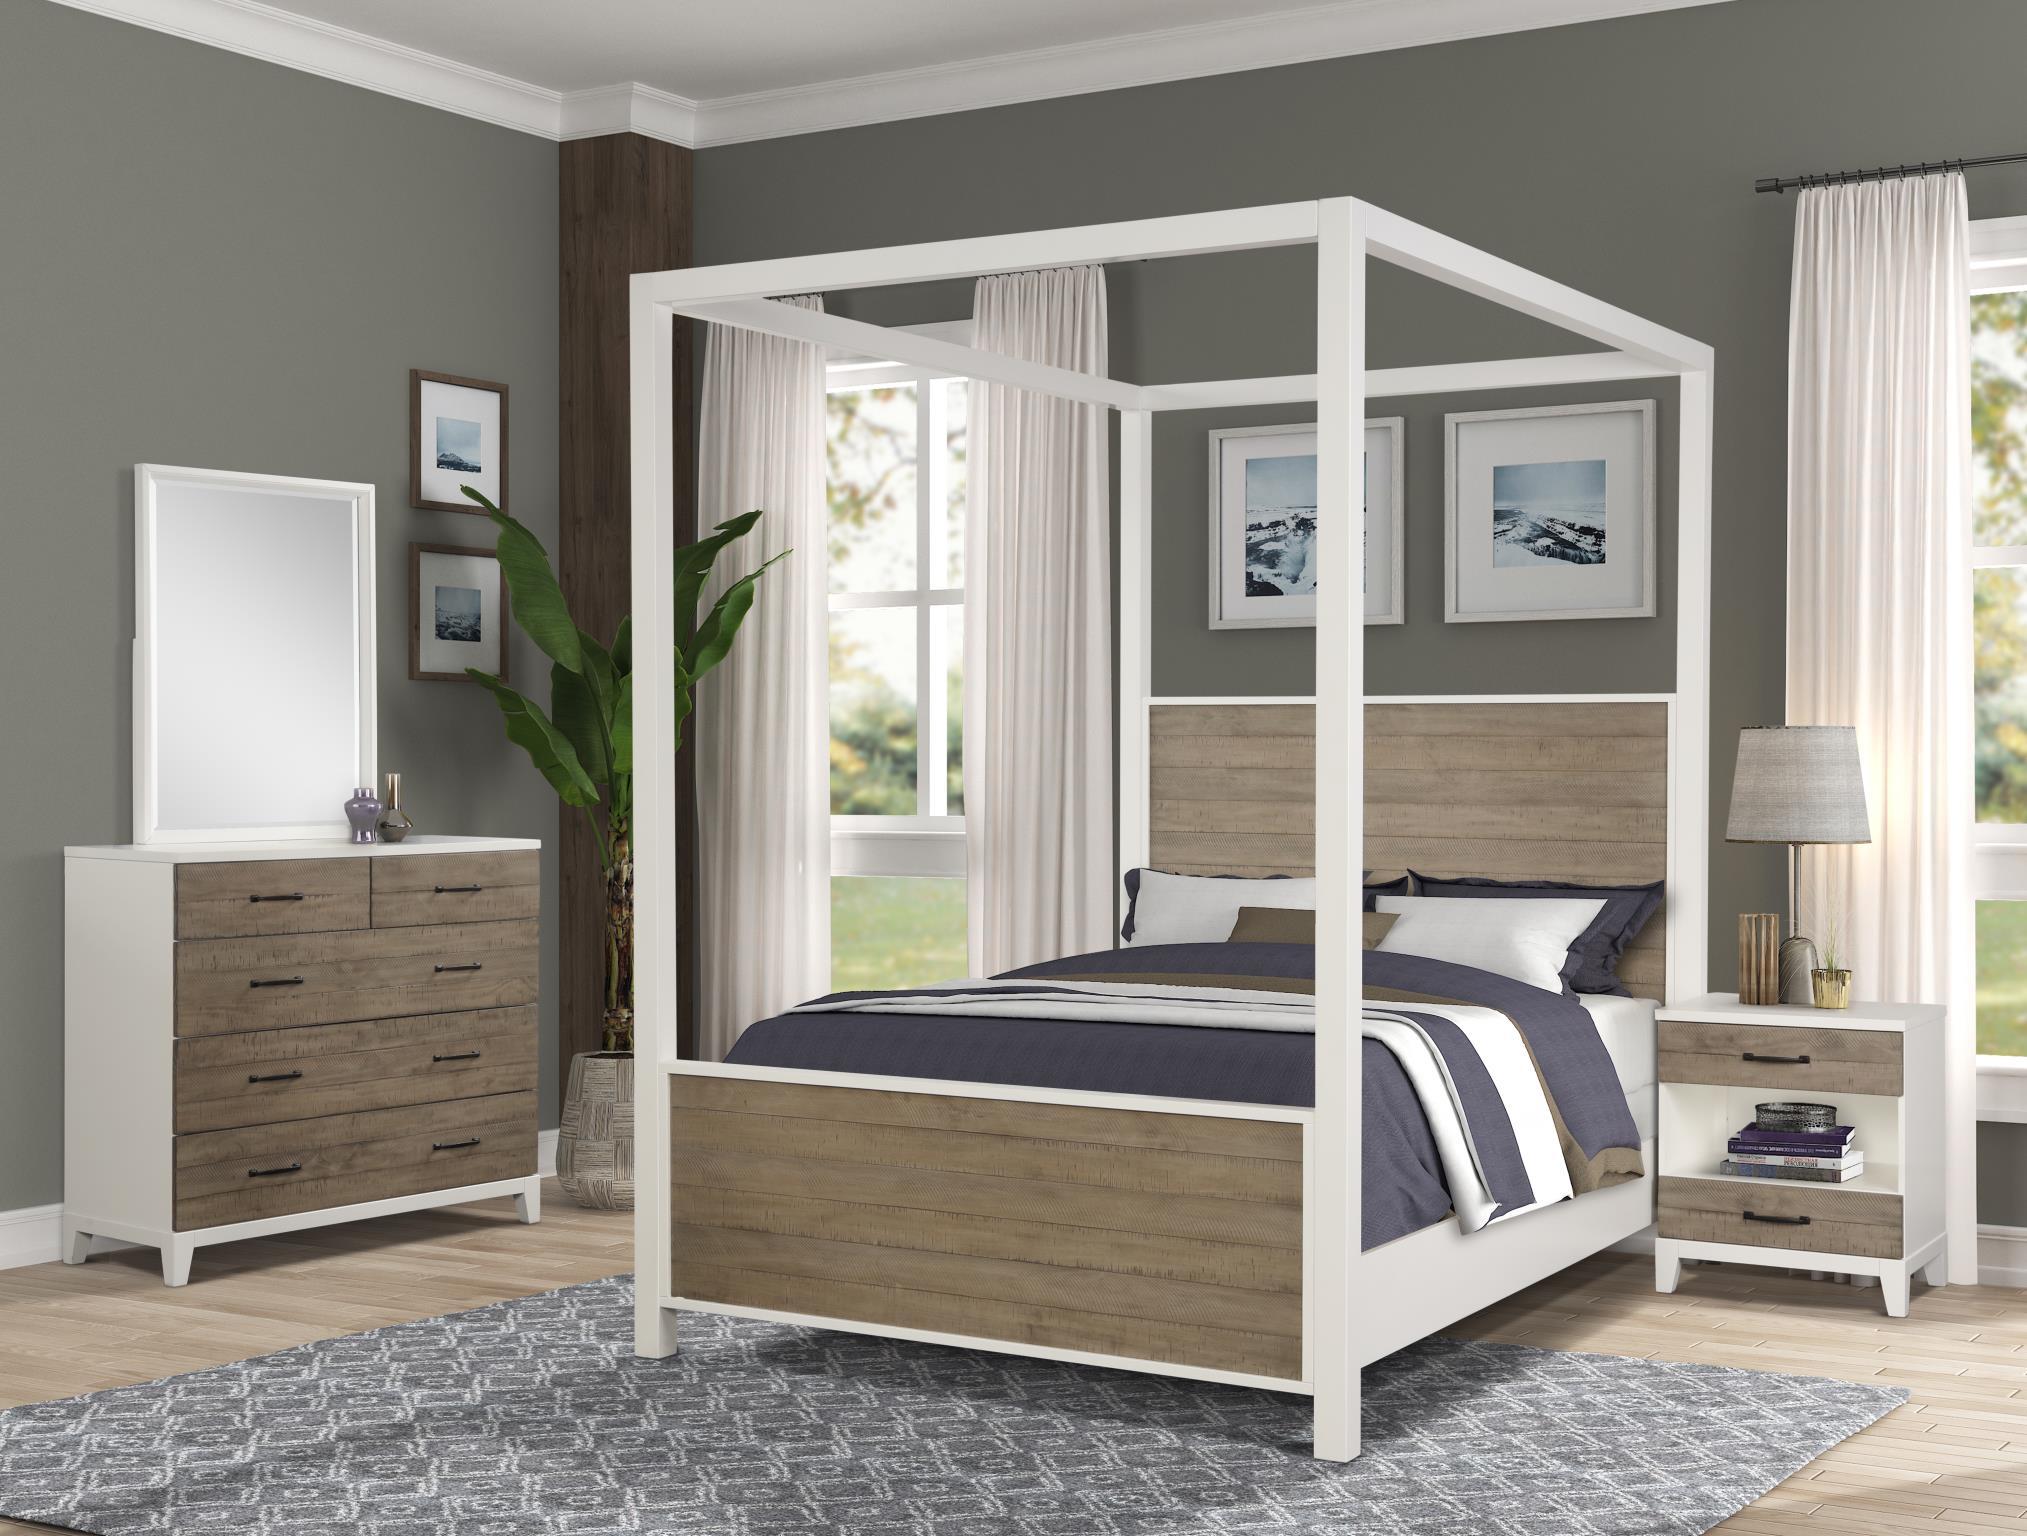 Contemporary, Transitional Bedroom Set Daydreams 1288-108-6pcs in Brown Oak 